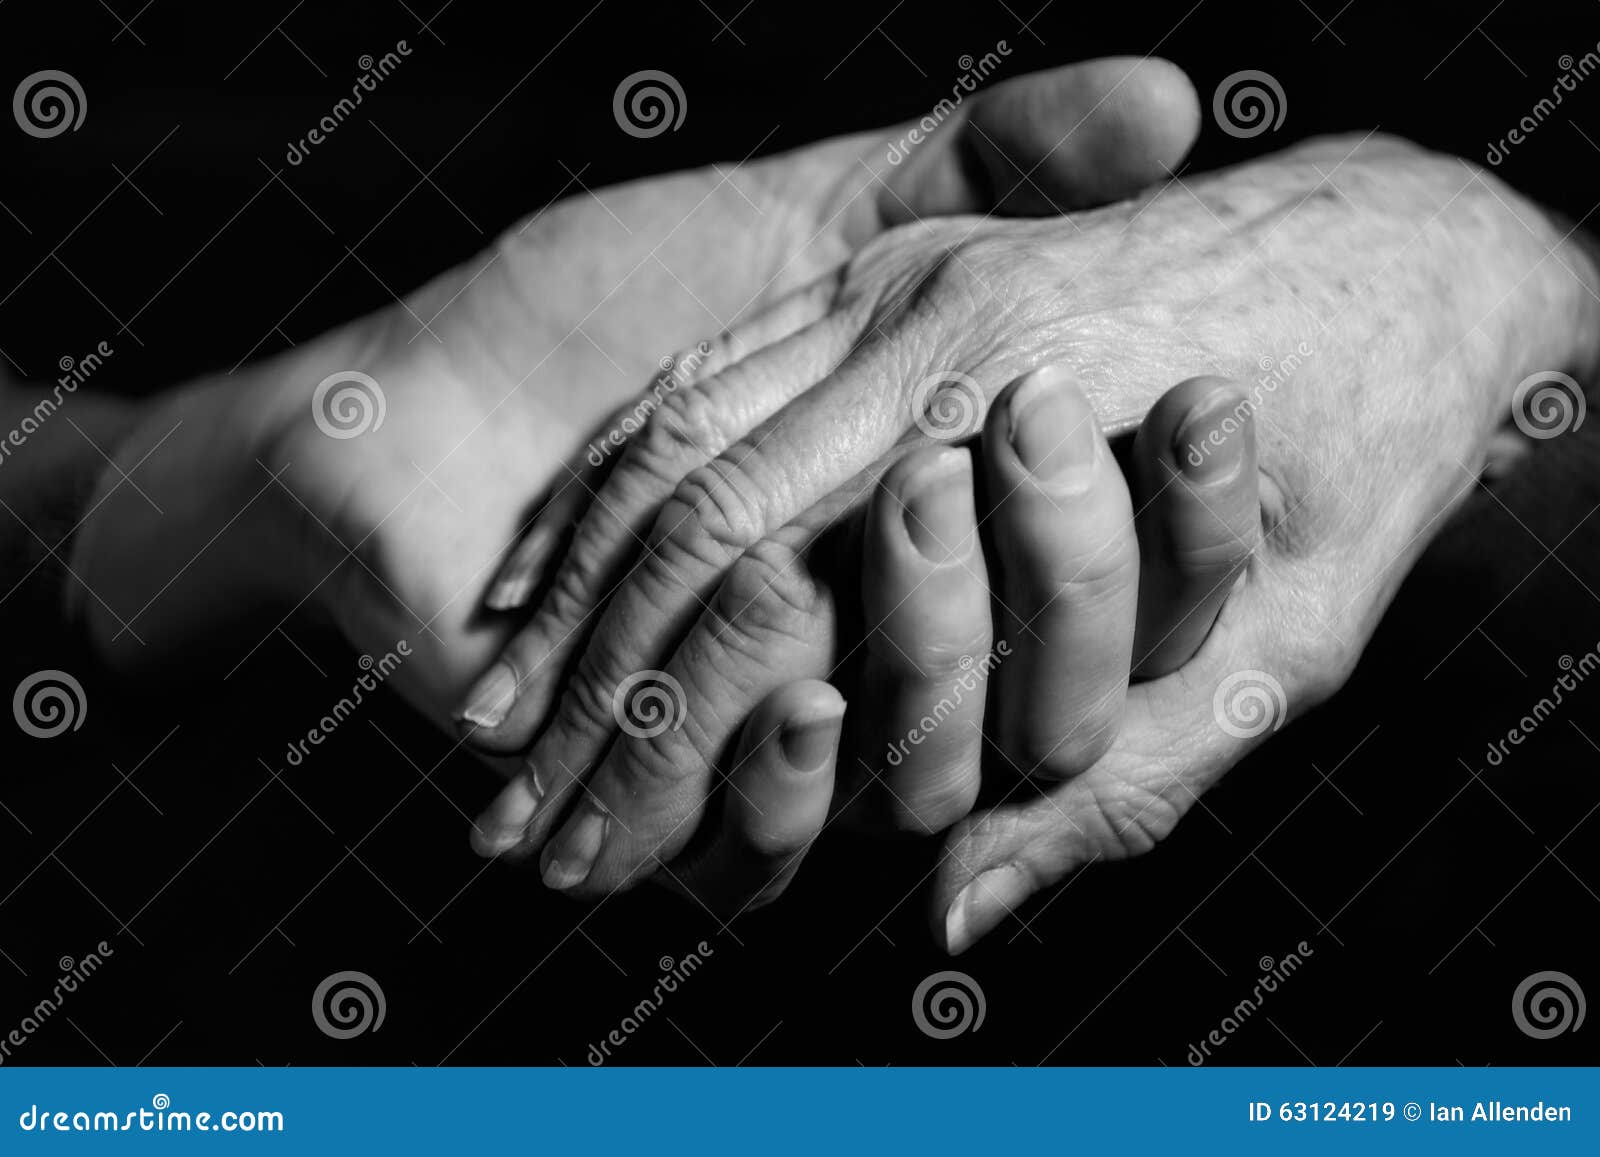 monochrome shot of young woman holding older woman's hand